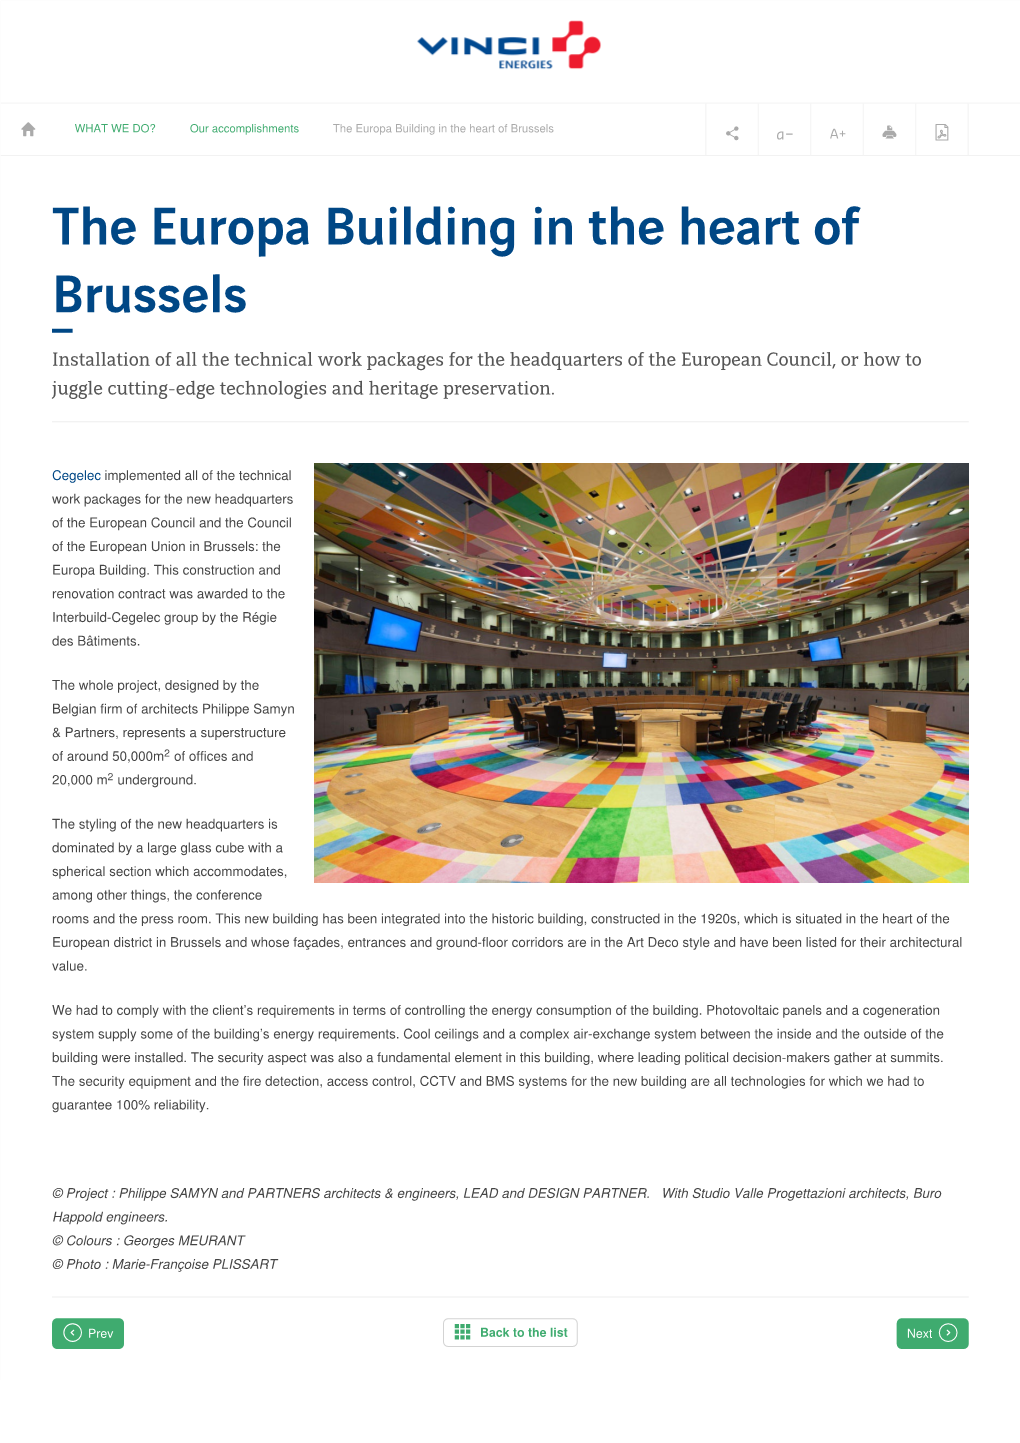 The Europa Building in the Heart of Brussels     